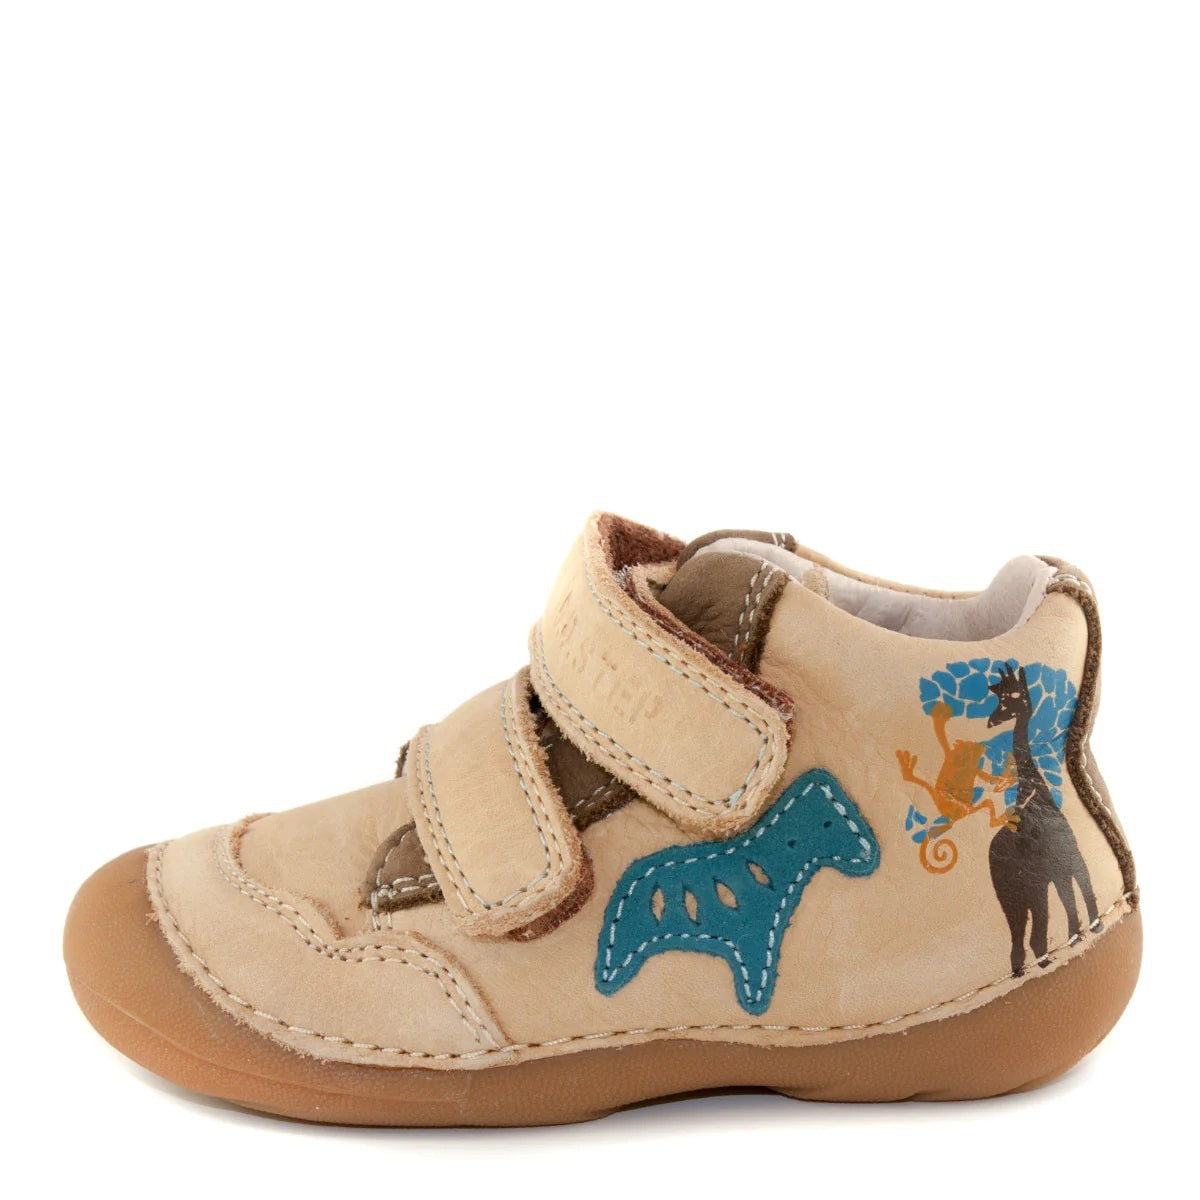 Premium quality first walker with genuine leather lining and upper in light brown with Africa theme. Thanks to its high level of specialization, D.D. Step knows exactly what your child’s feet need, to develop properly in the various phases of growth. The exceptional comfort these shoes provide assure the well-being and happiness of your child.